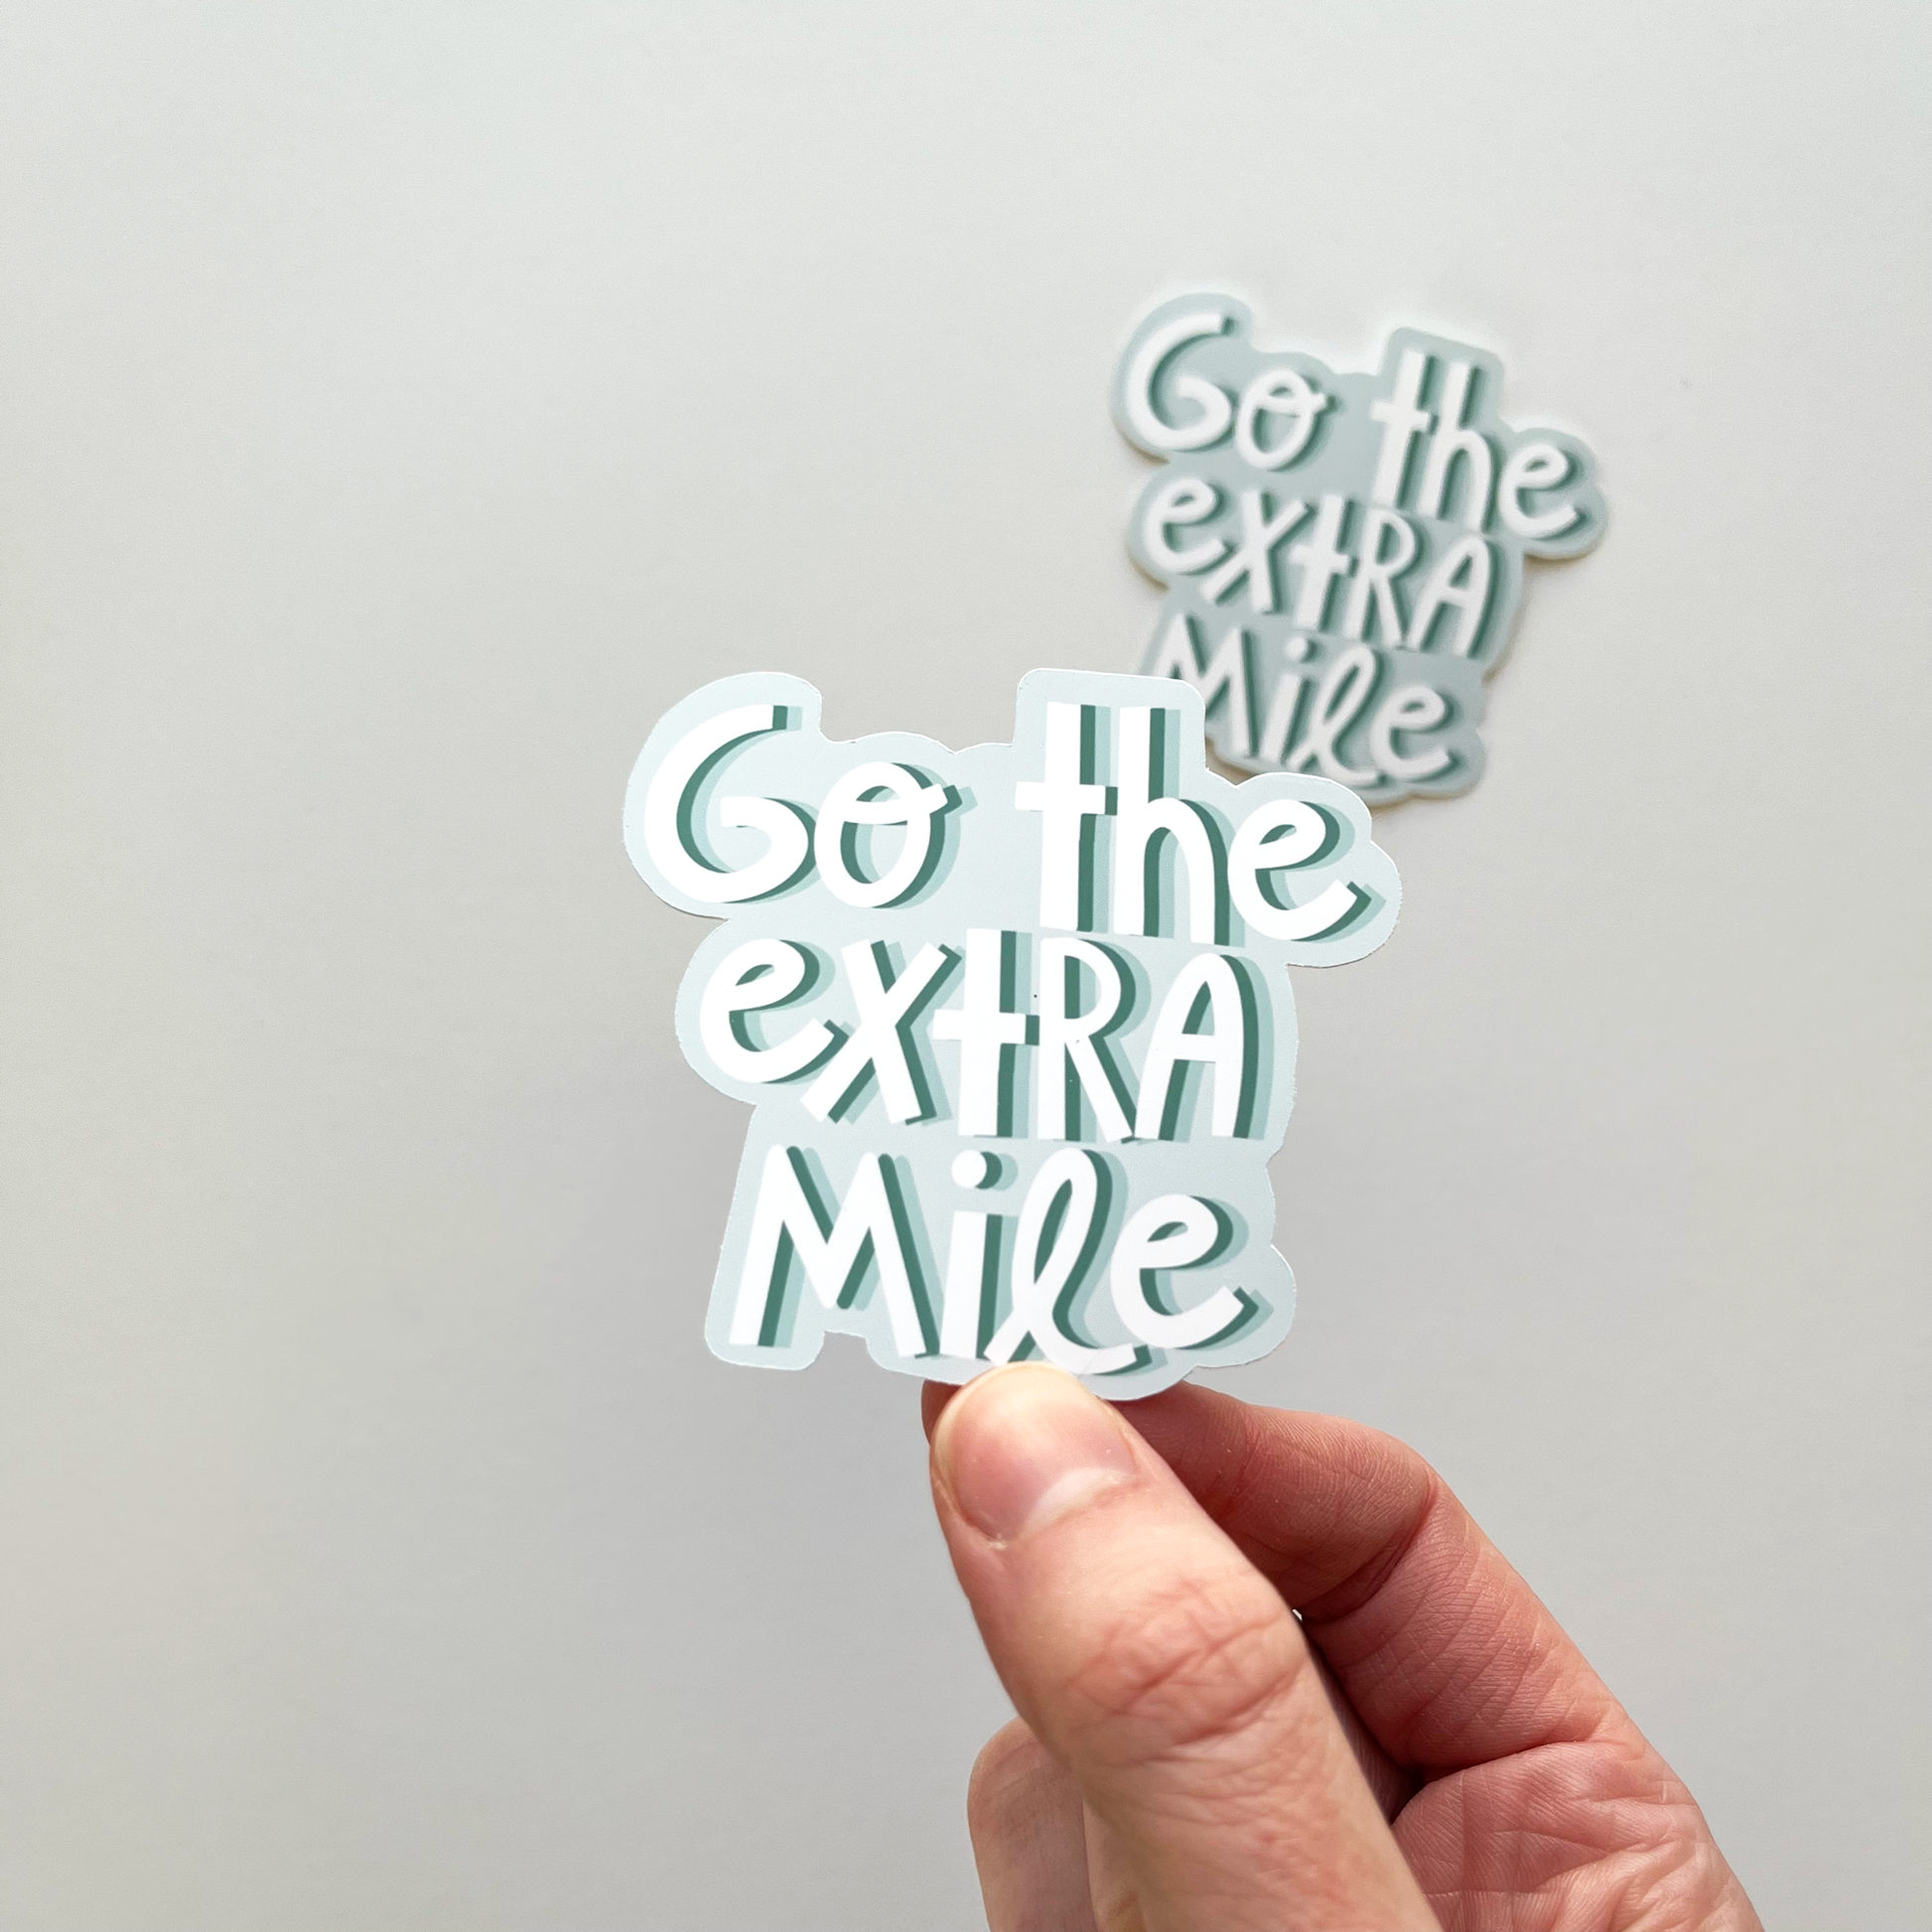 Go the extra mile sticker in colors of teal and blue